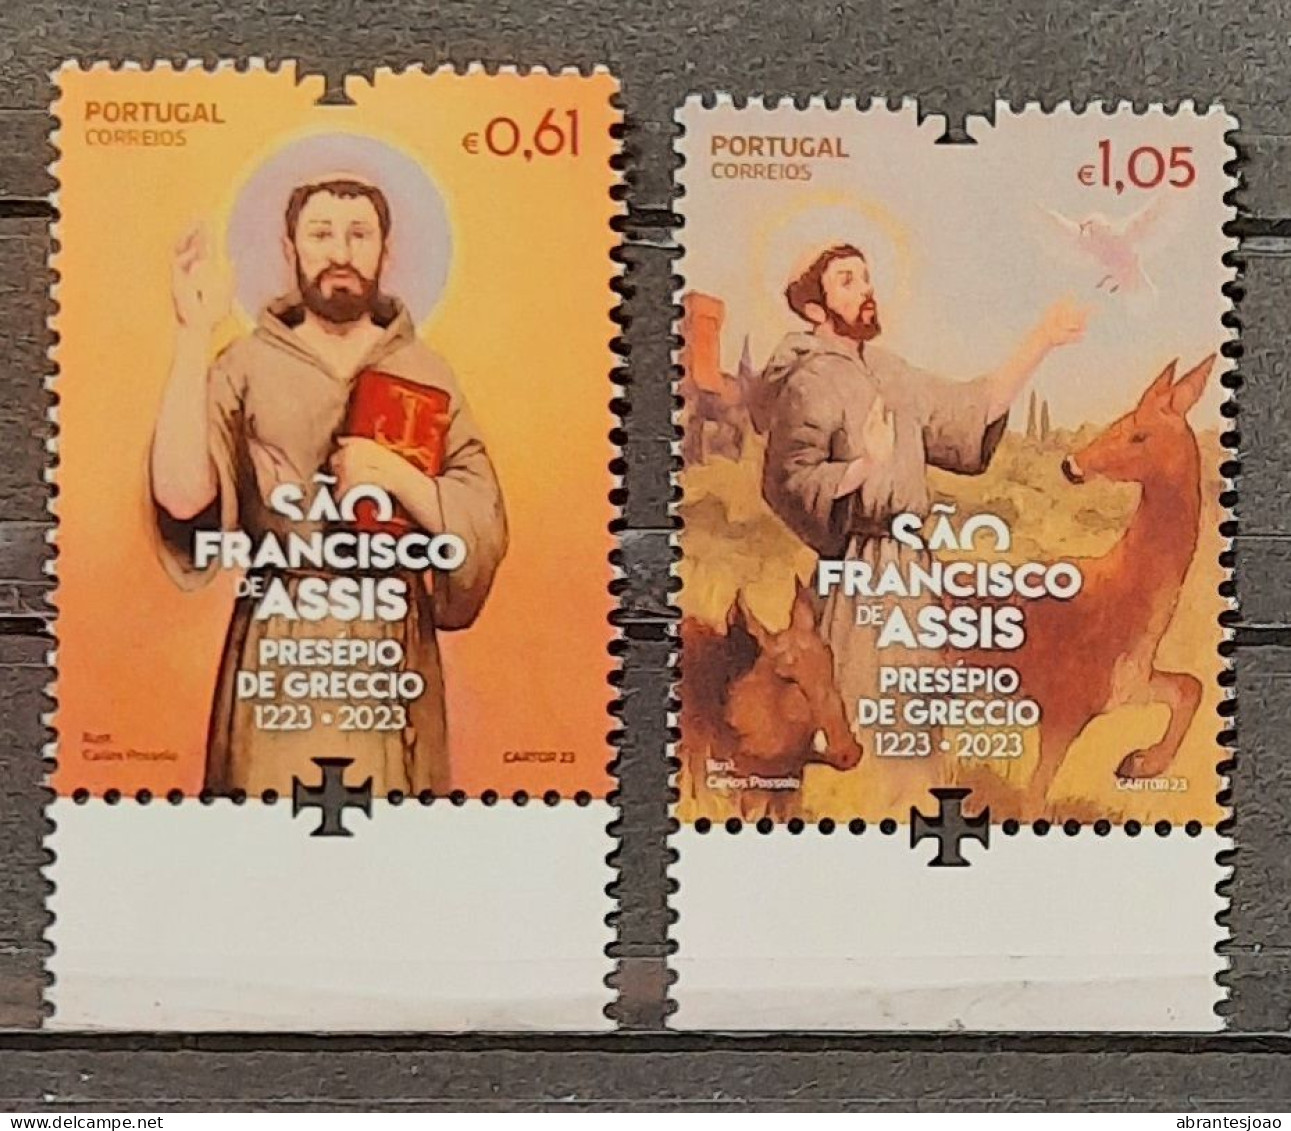 2023 - Portugal - MNH - Saint Francis Of Assis - Presepius Of Greccio - 1223/2023 - 2 Stamps + Block Of 1 Stamp - Neufs